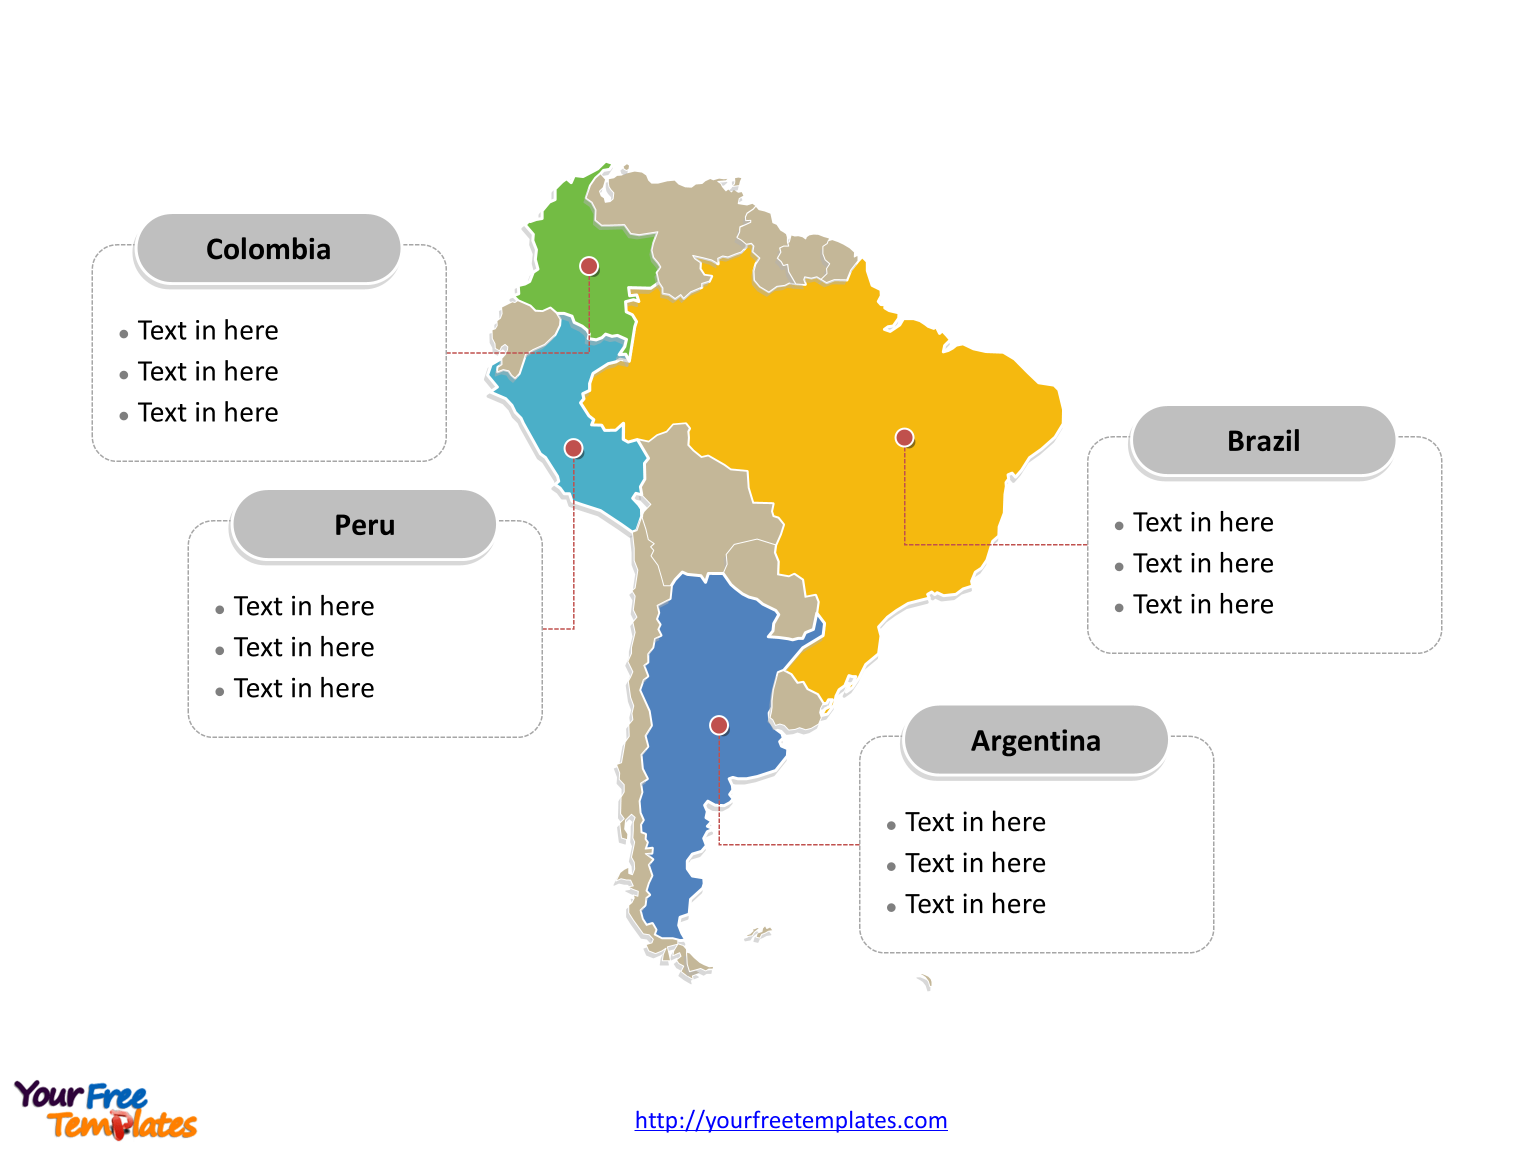 Map of South America with political division and major Countries labeled on the Blank South America map free templates